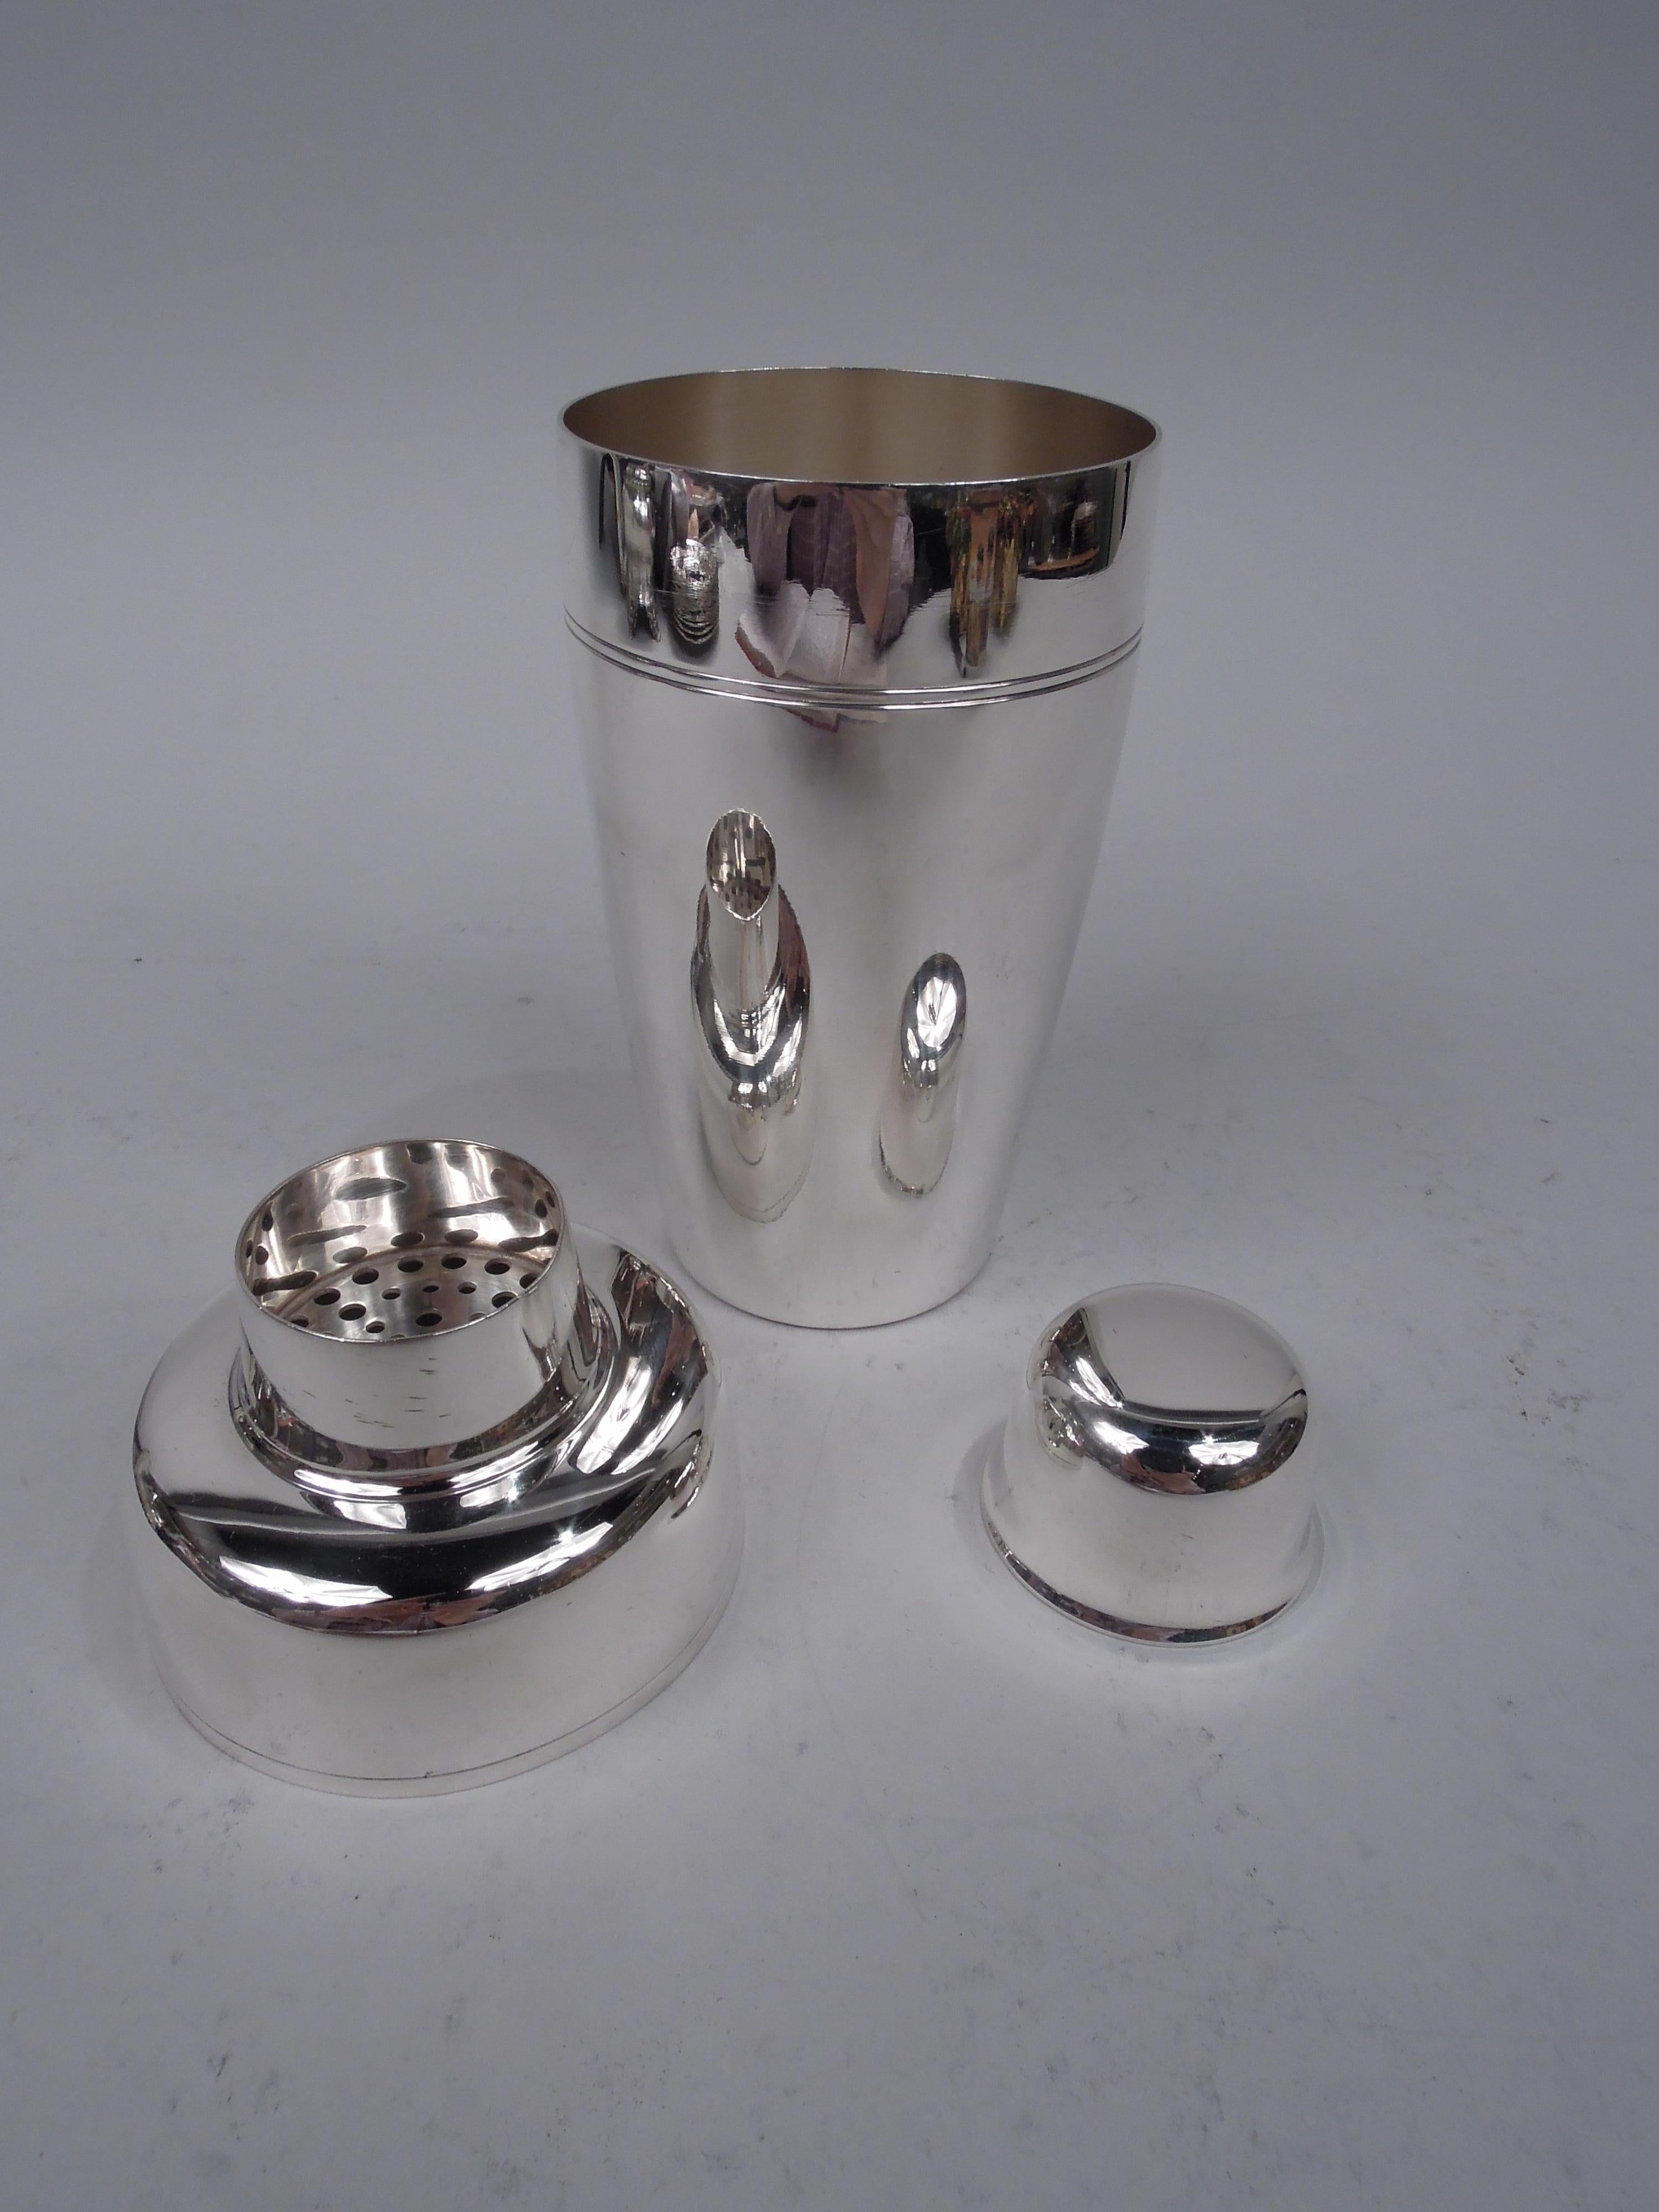 Midcentury Modern sterling silver cocktail shaker. Made by Tiffany & Co. in New York. The classic bullet form with tapering cup, curved shoulders, and inset spout with built-in strainer and snug-fitting jigger cap. Spare with incised bands. Nice